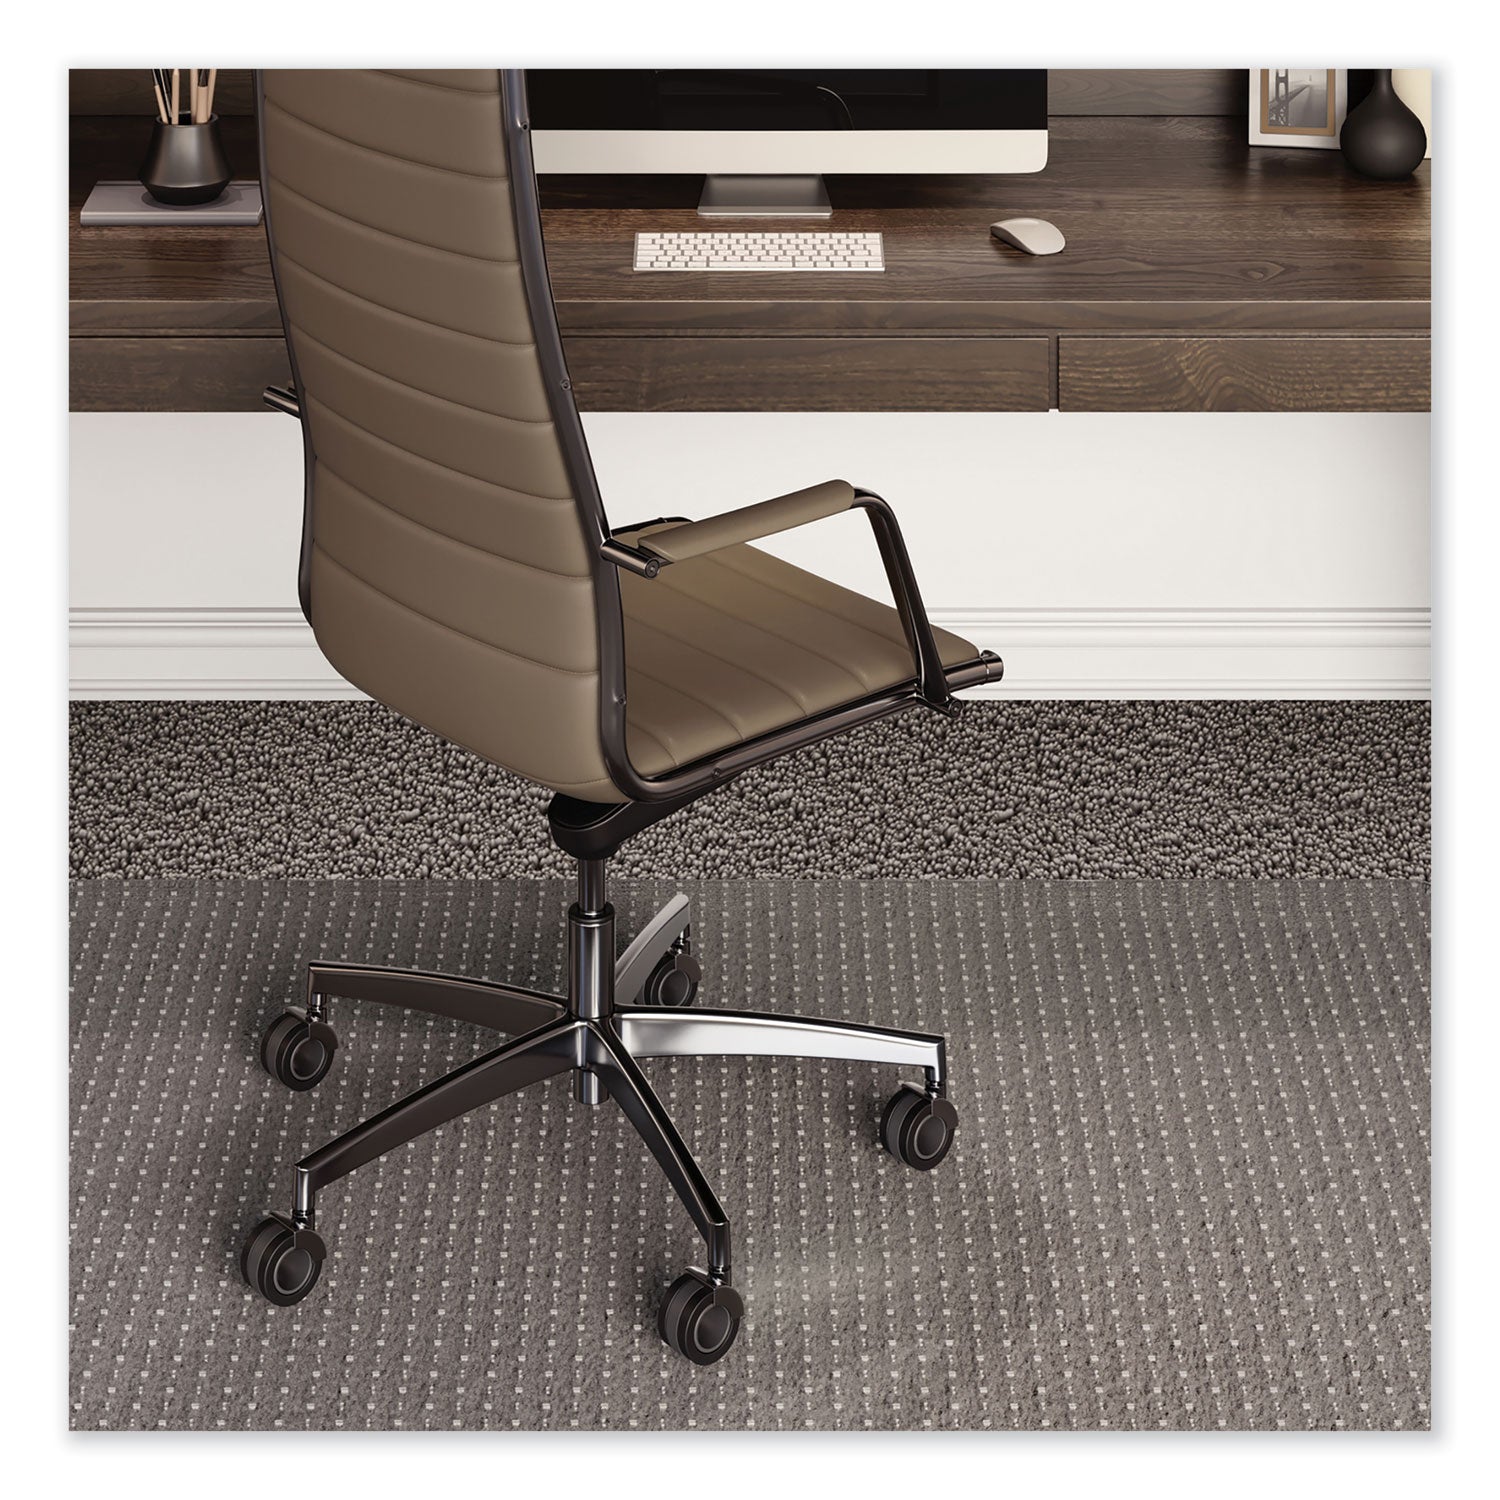 everlife-chair-mat-for-extra-high-pile-carpet-60-x-72-clear-ships-in-4-6-business-days_esr124781 - 8